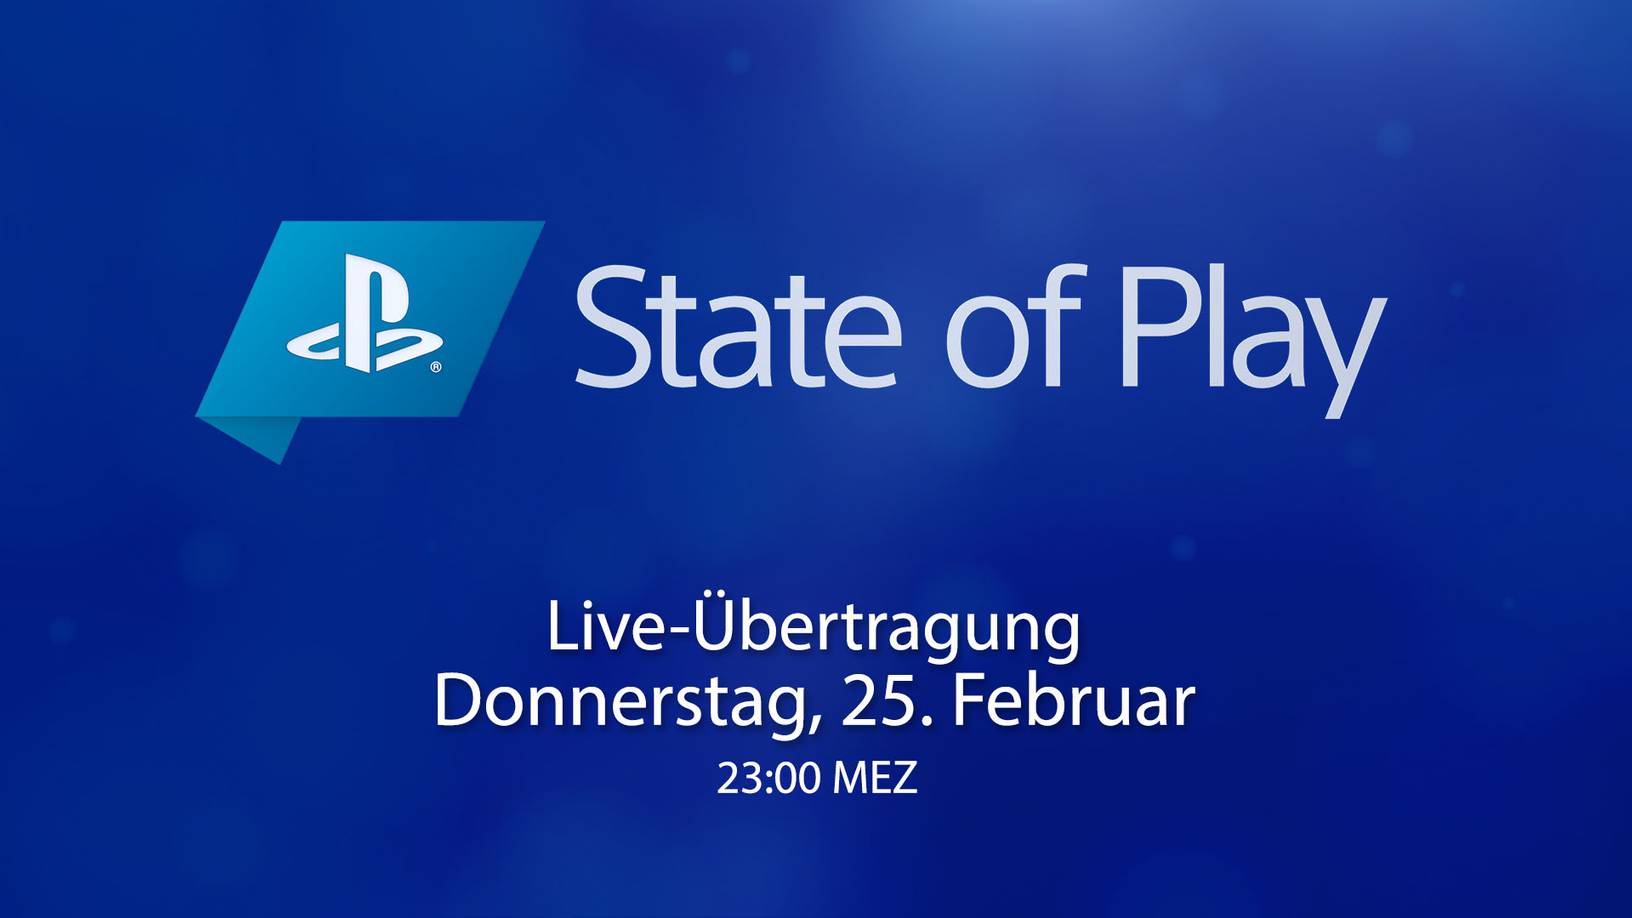 Watch the live broadcast here from 11 pm on • JPGAMES.DE